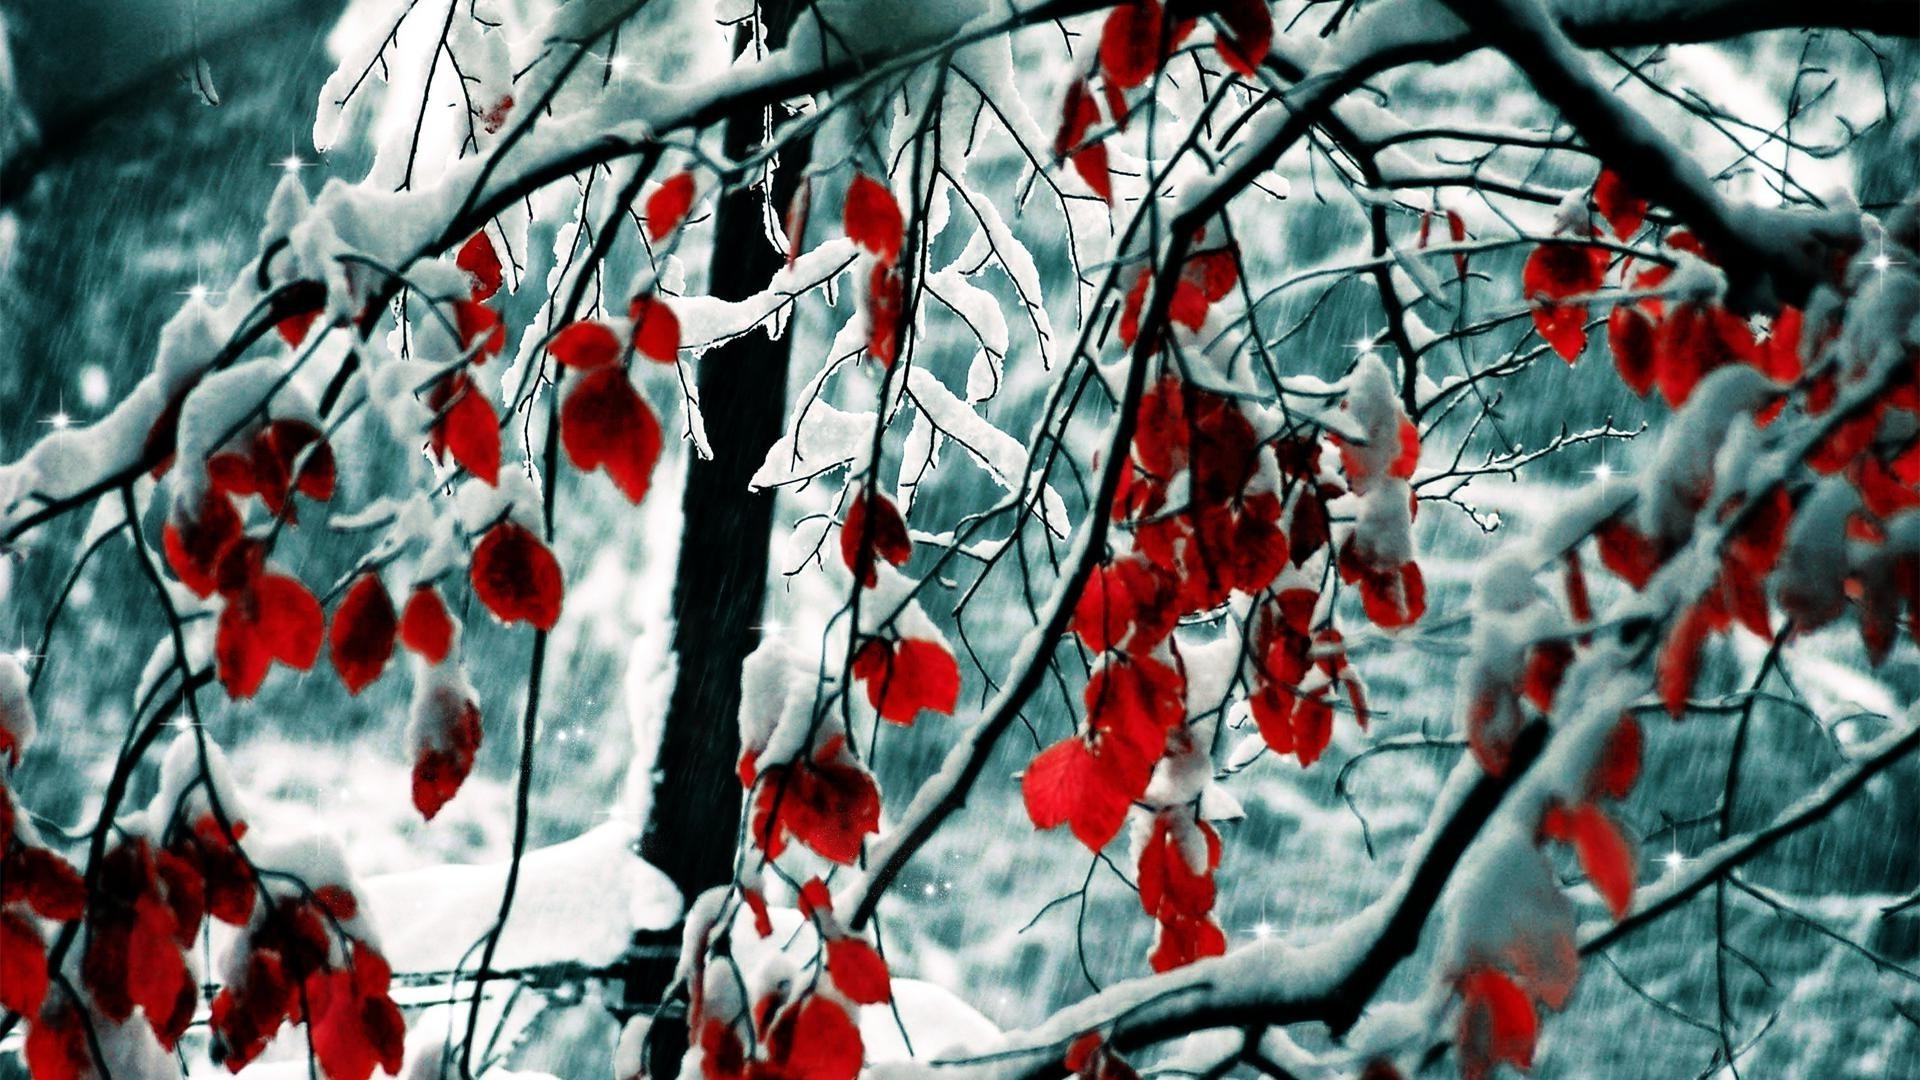 trees season winter tree branch leaf nature outdoors flora frost desktop snow fall bright color hanging wood weather